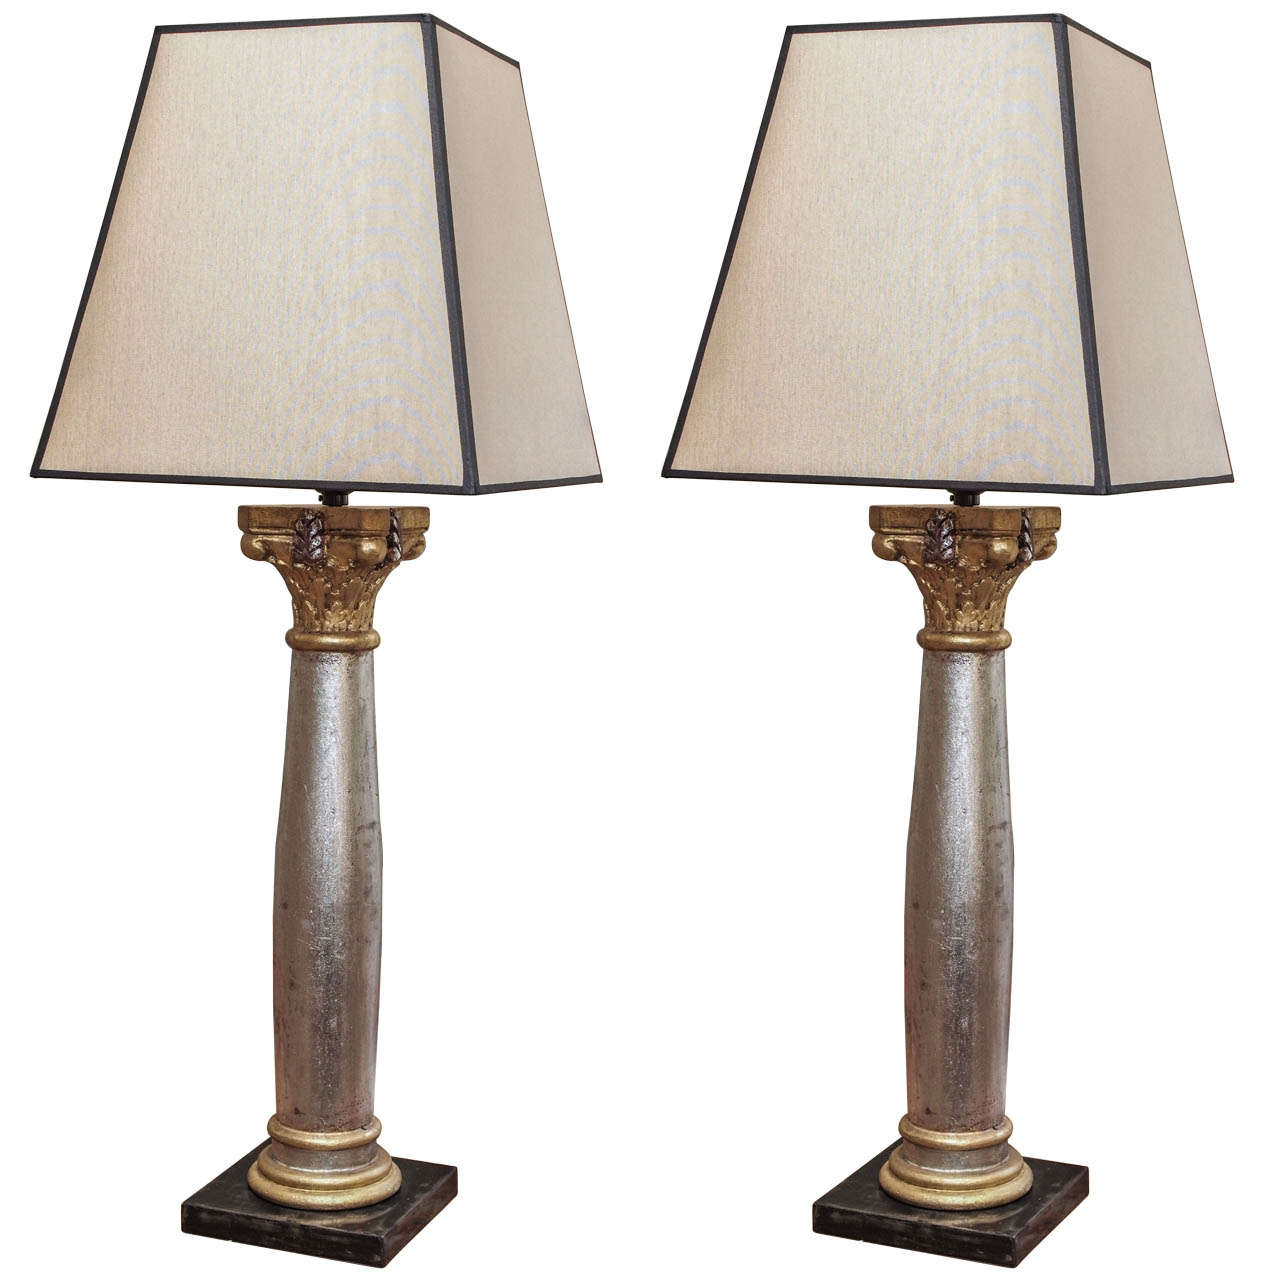 Pair of Silver and Gold Gilt Wood Column Lamps with Shades